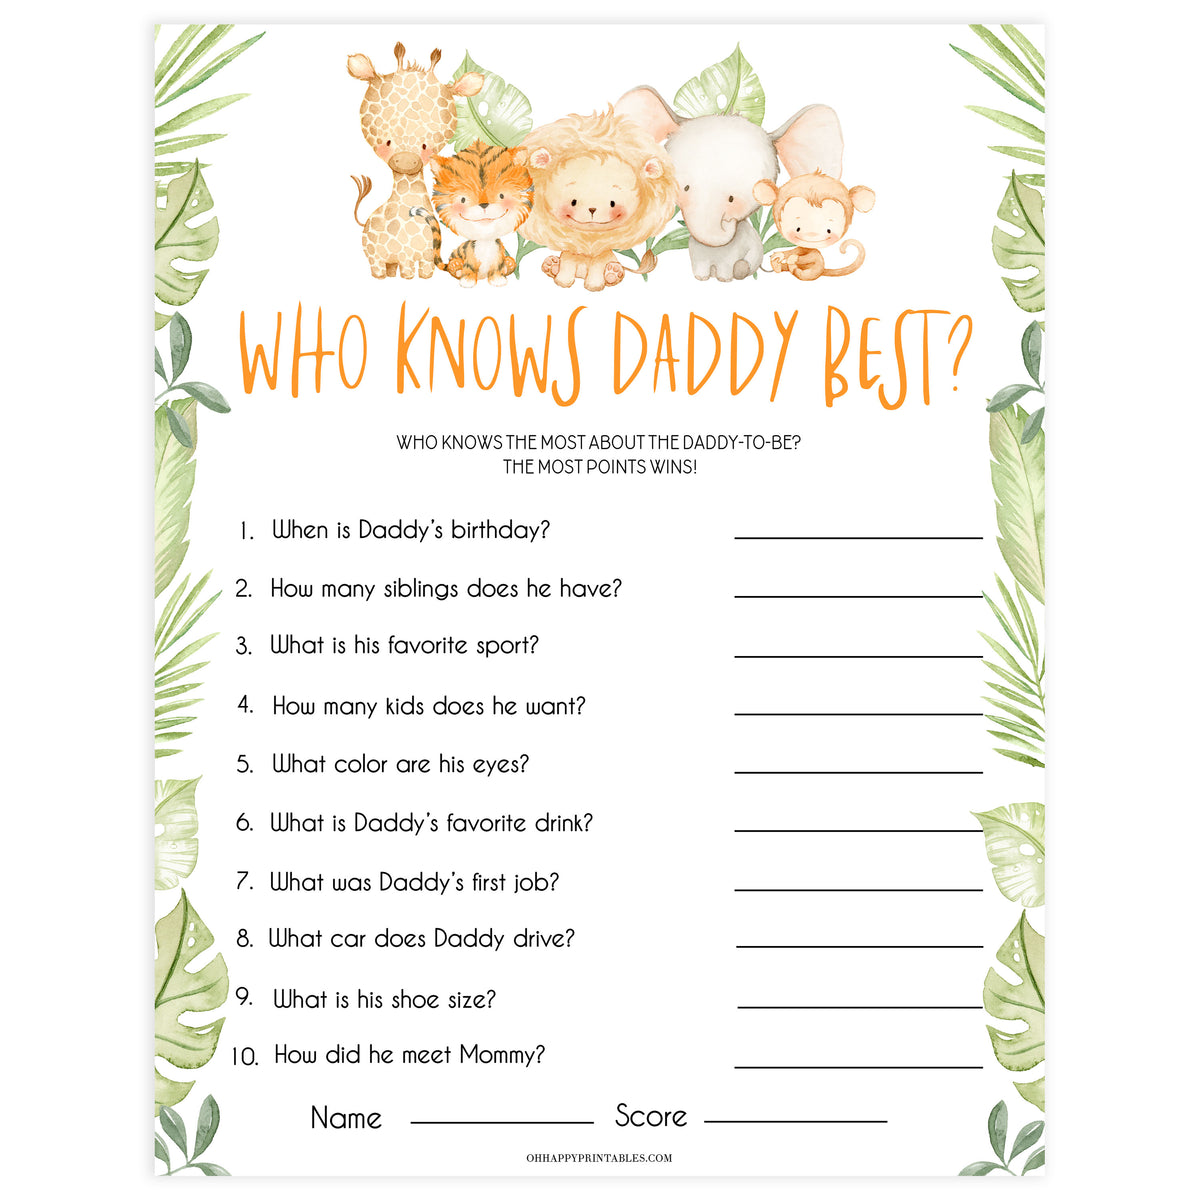 who knows daddy best game, Printable baby shower games, safari animals baby games, baby shower games, fun baby shower ideas, top baby shower ideas, safari animals baby shower, baby shower games, fun baby shower ideas